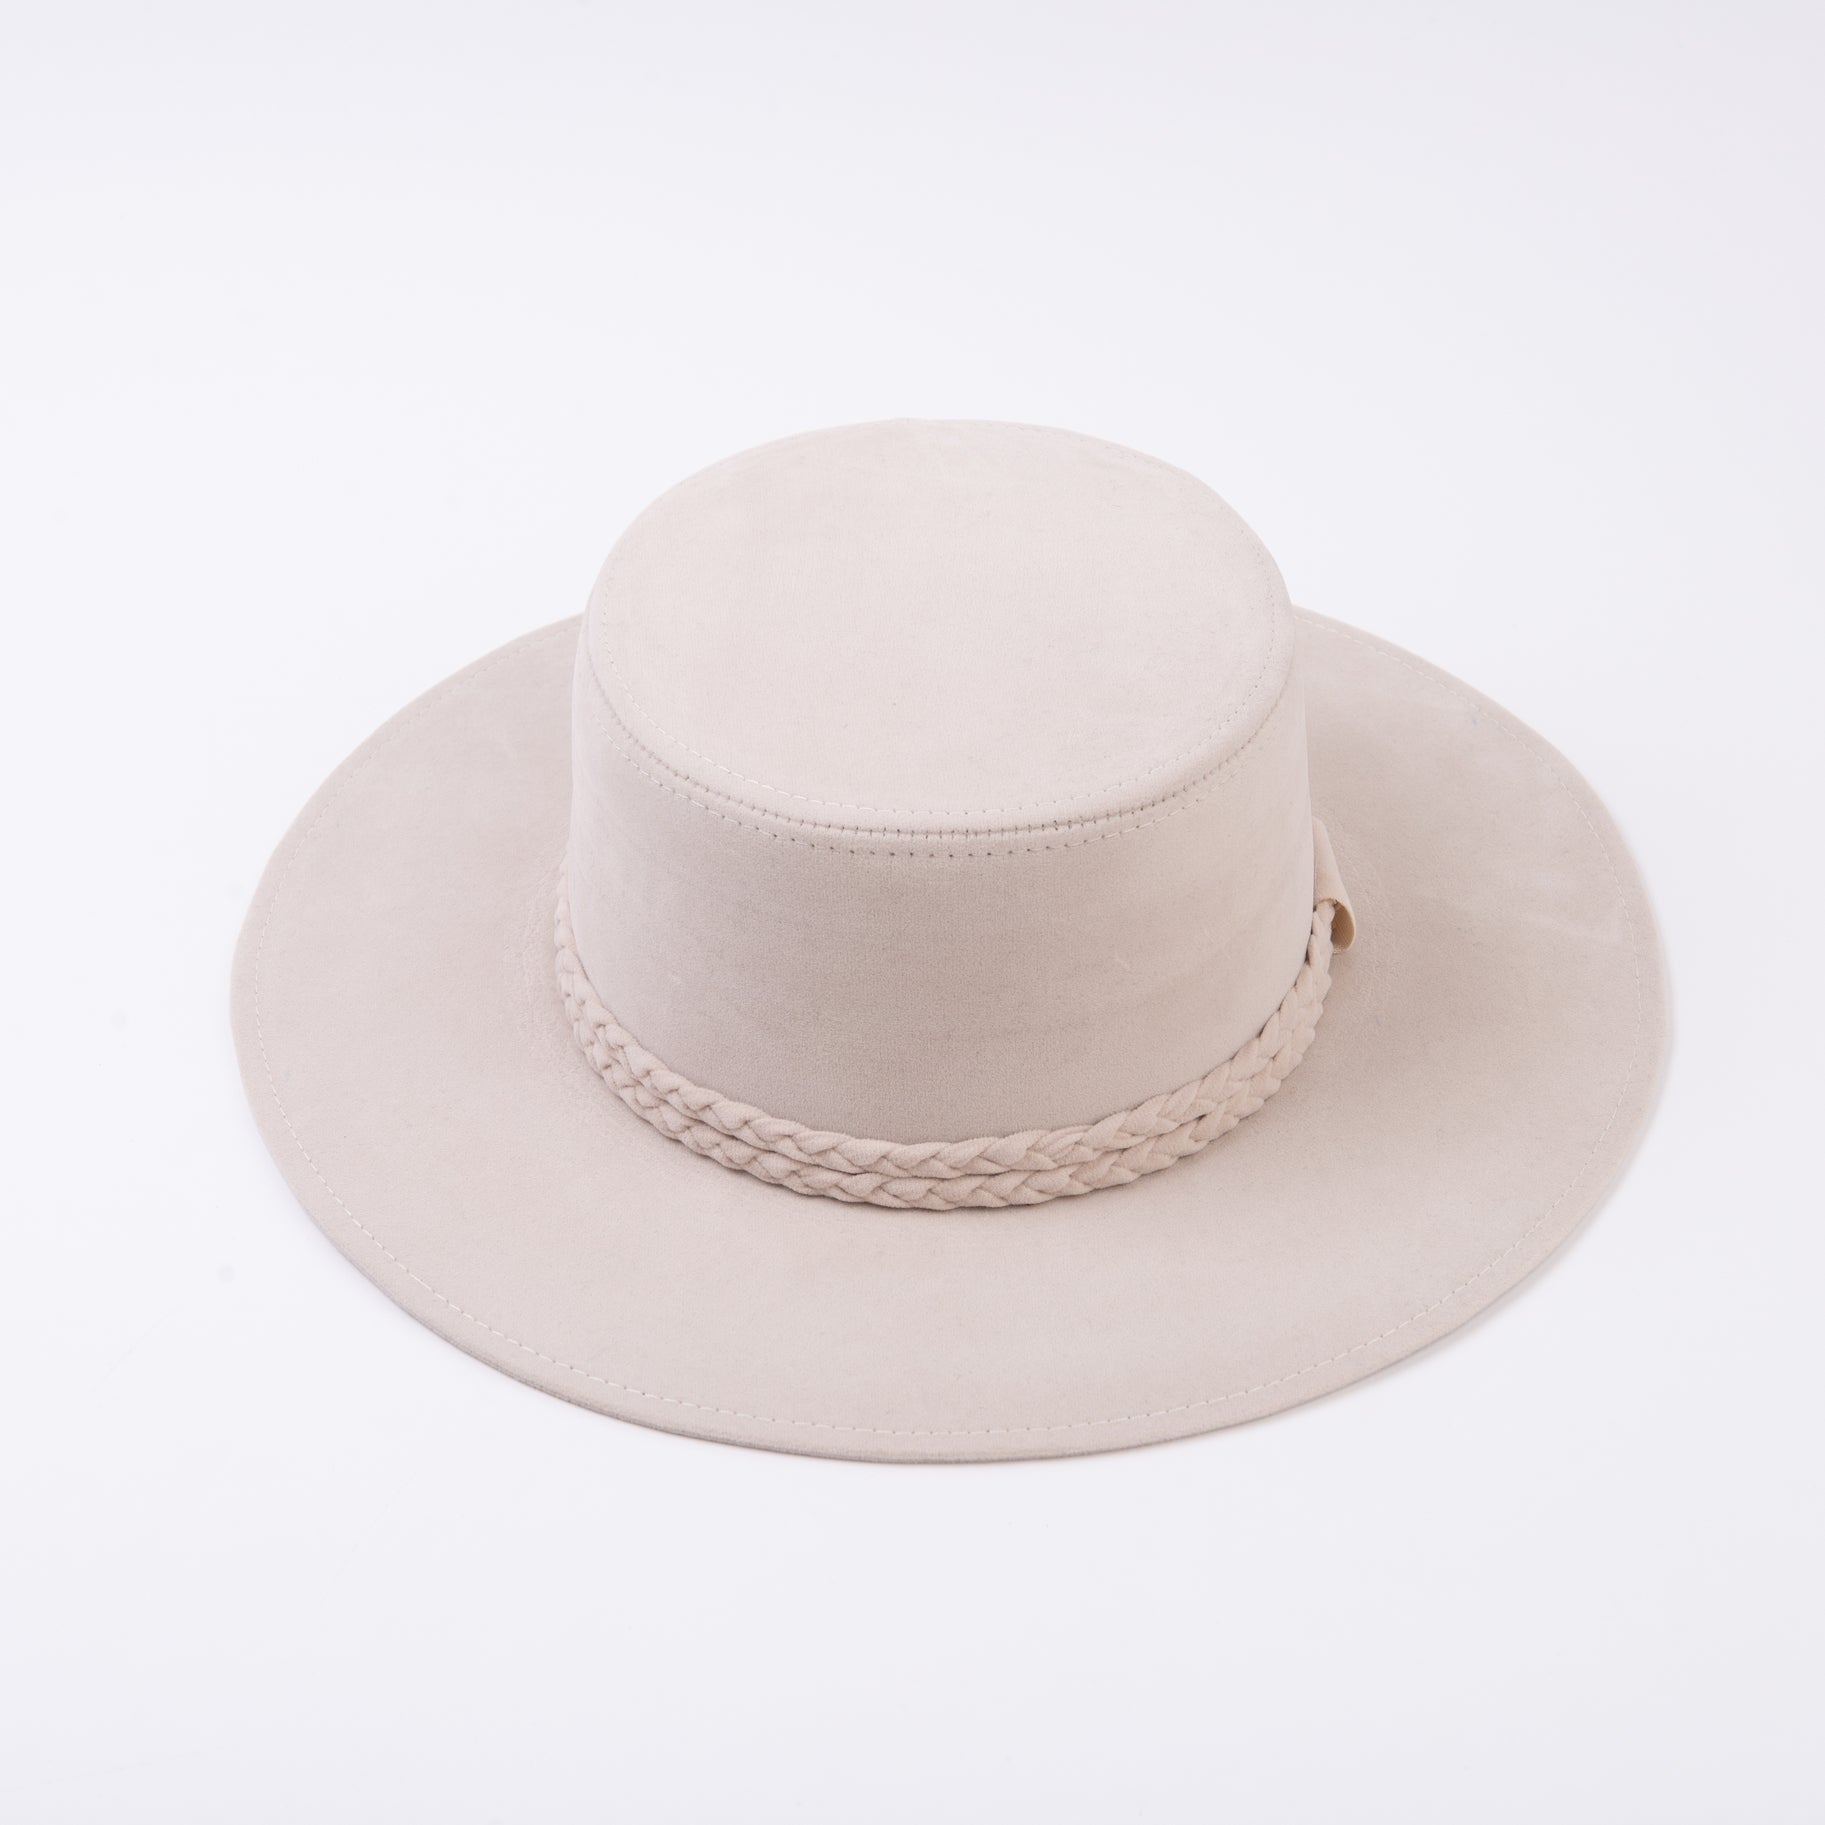 The Sonoran Double Braid Boater Hat